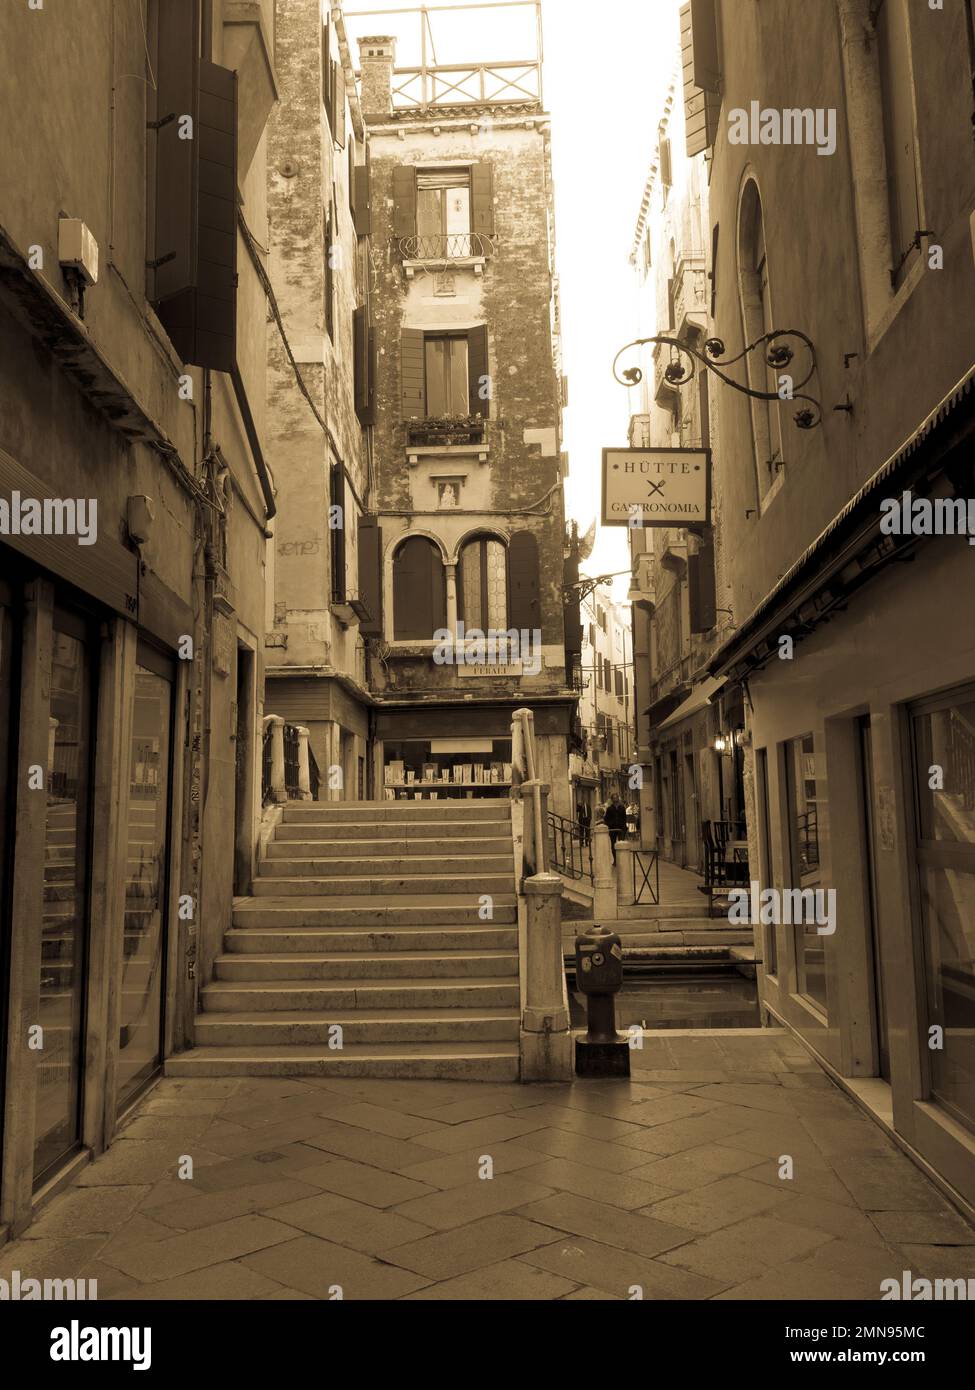 Sepia colored photo of the streets of Venice, Italy. Tourism concept. Stock Photo